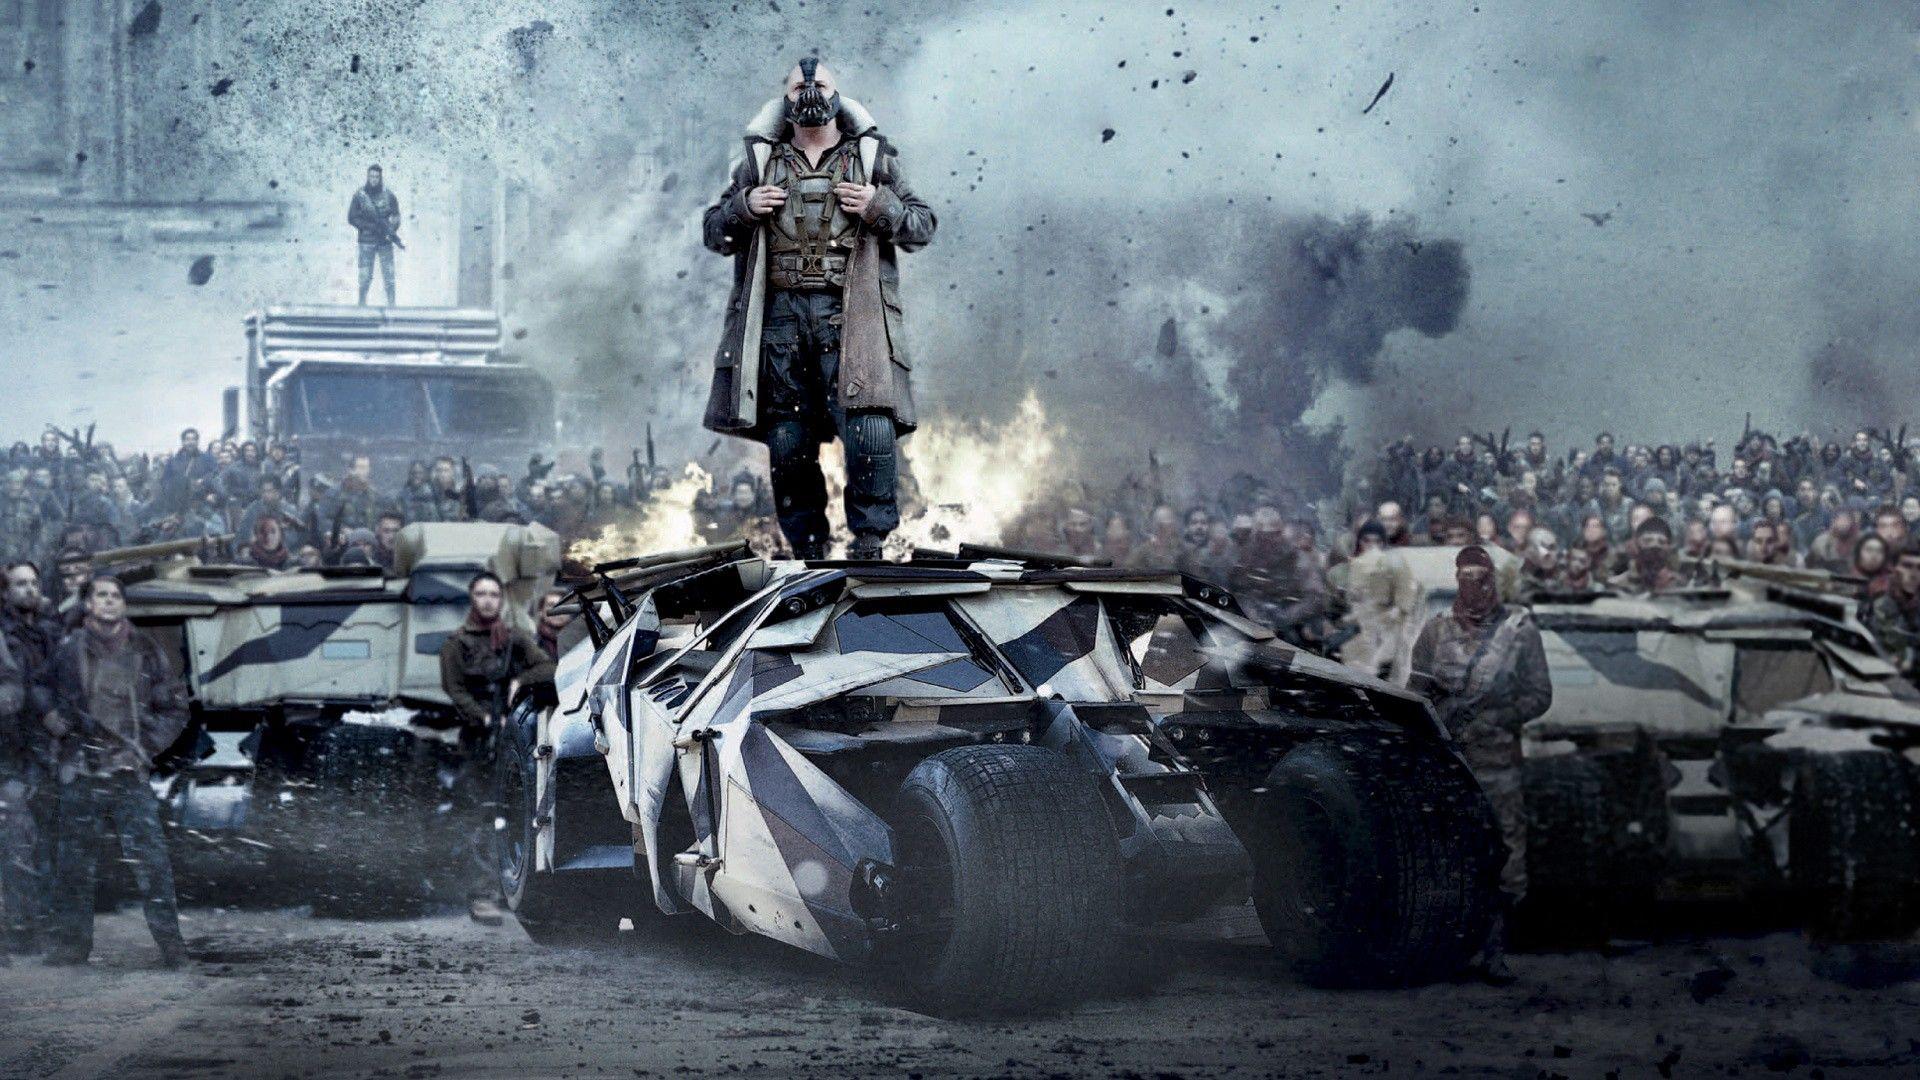 Daily Wallpaper: The Dark Knight Rises. I Like To Waste My Time